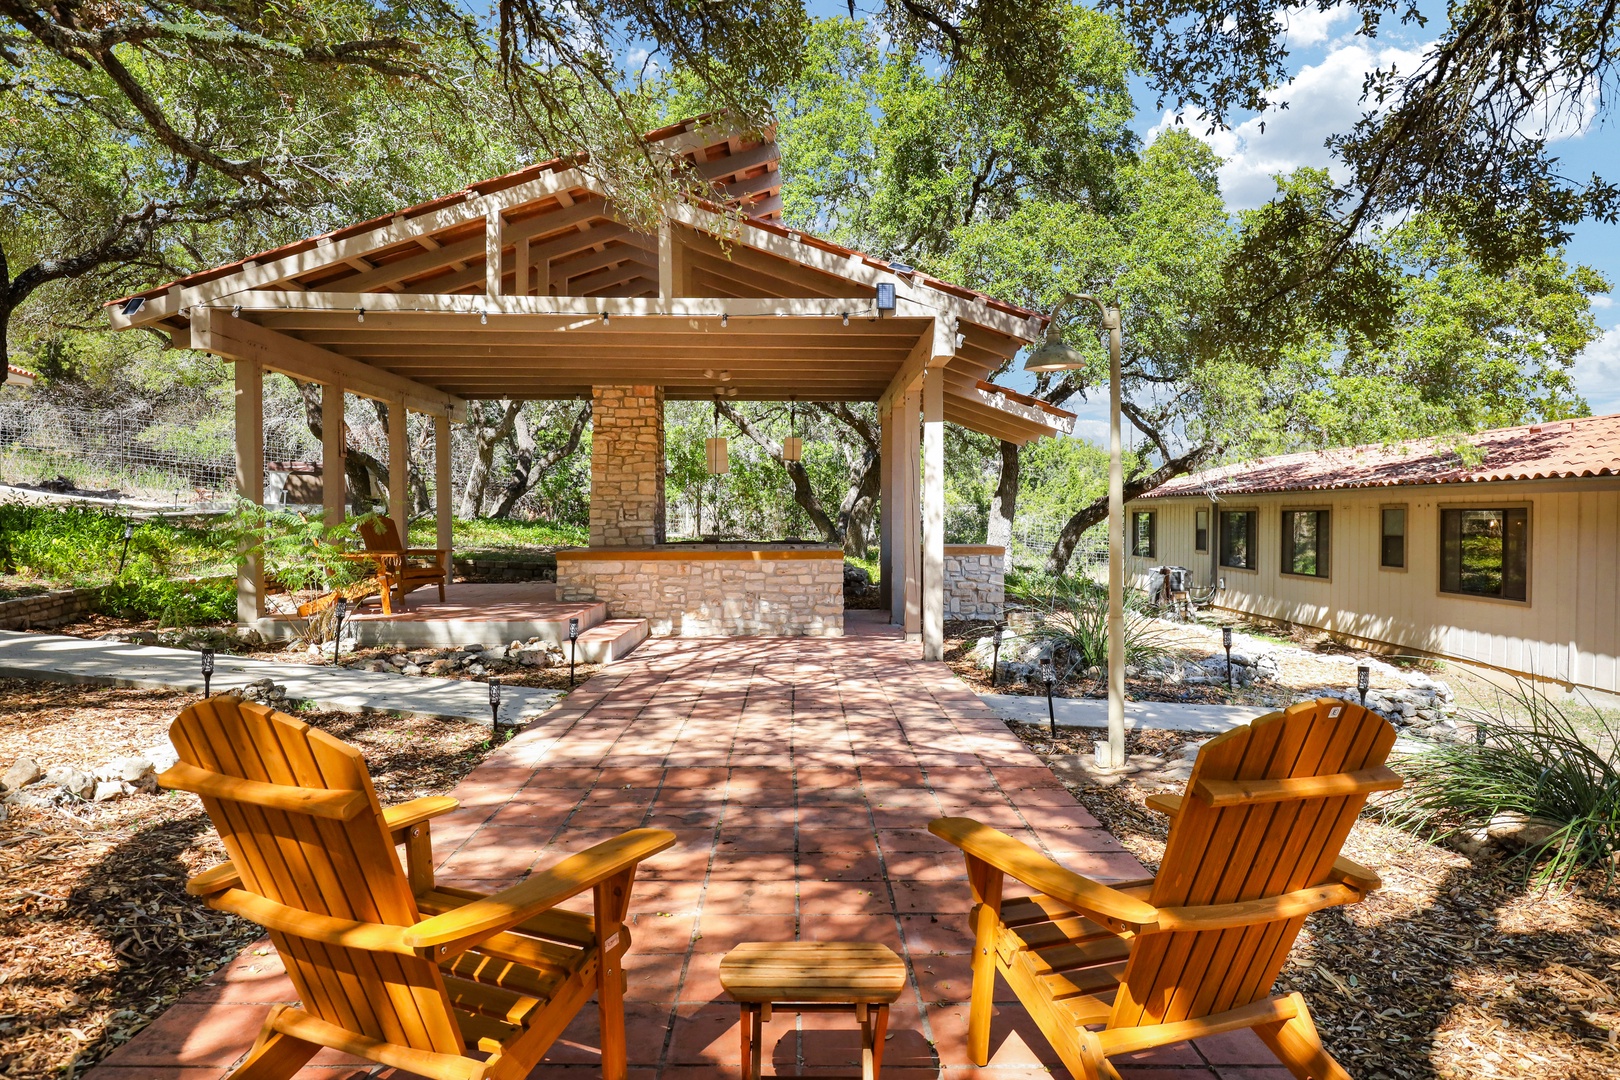 This exceptional property offers abundant outdoor options for relaxation & fun